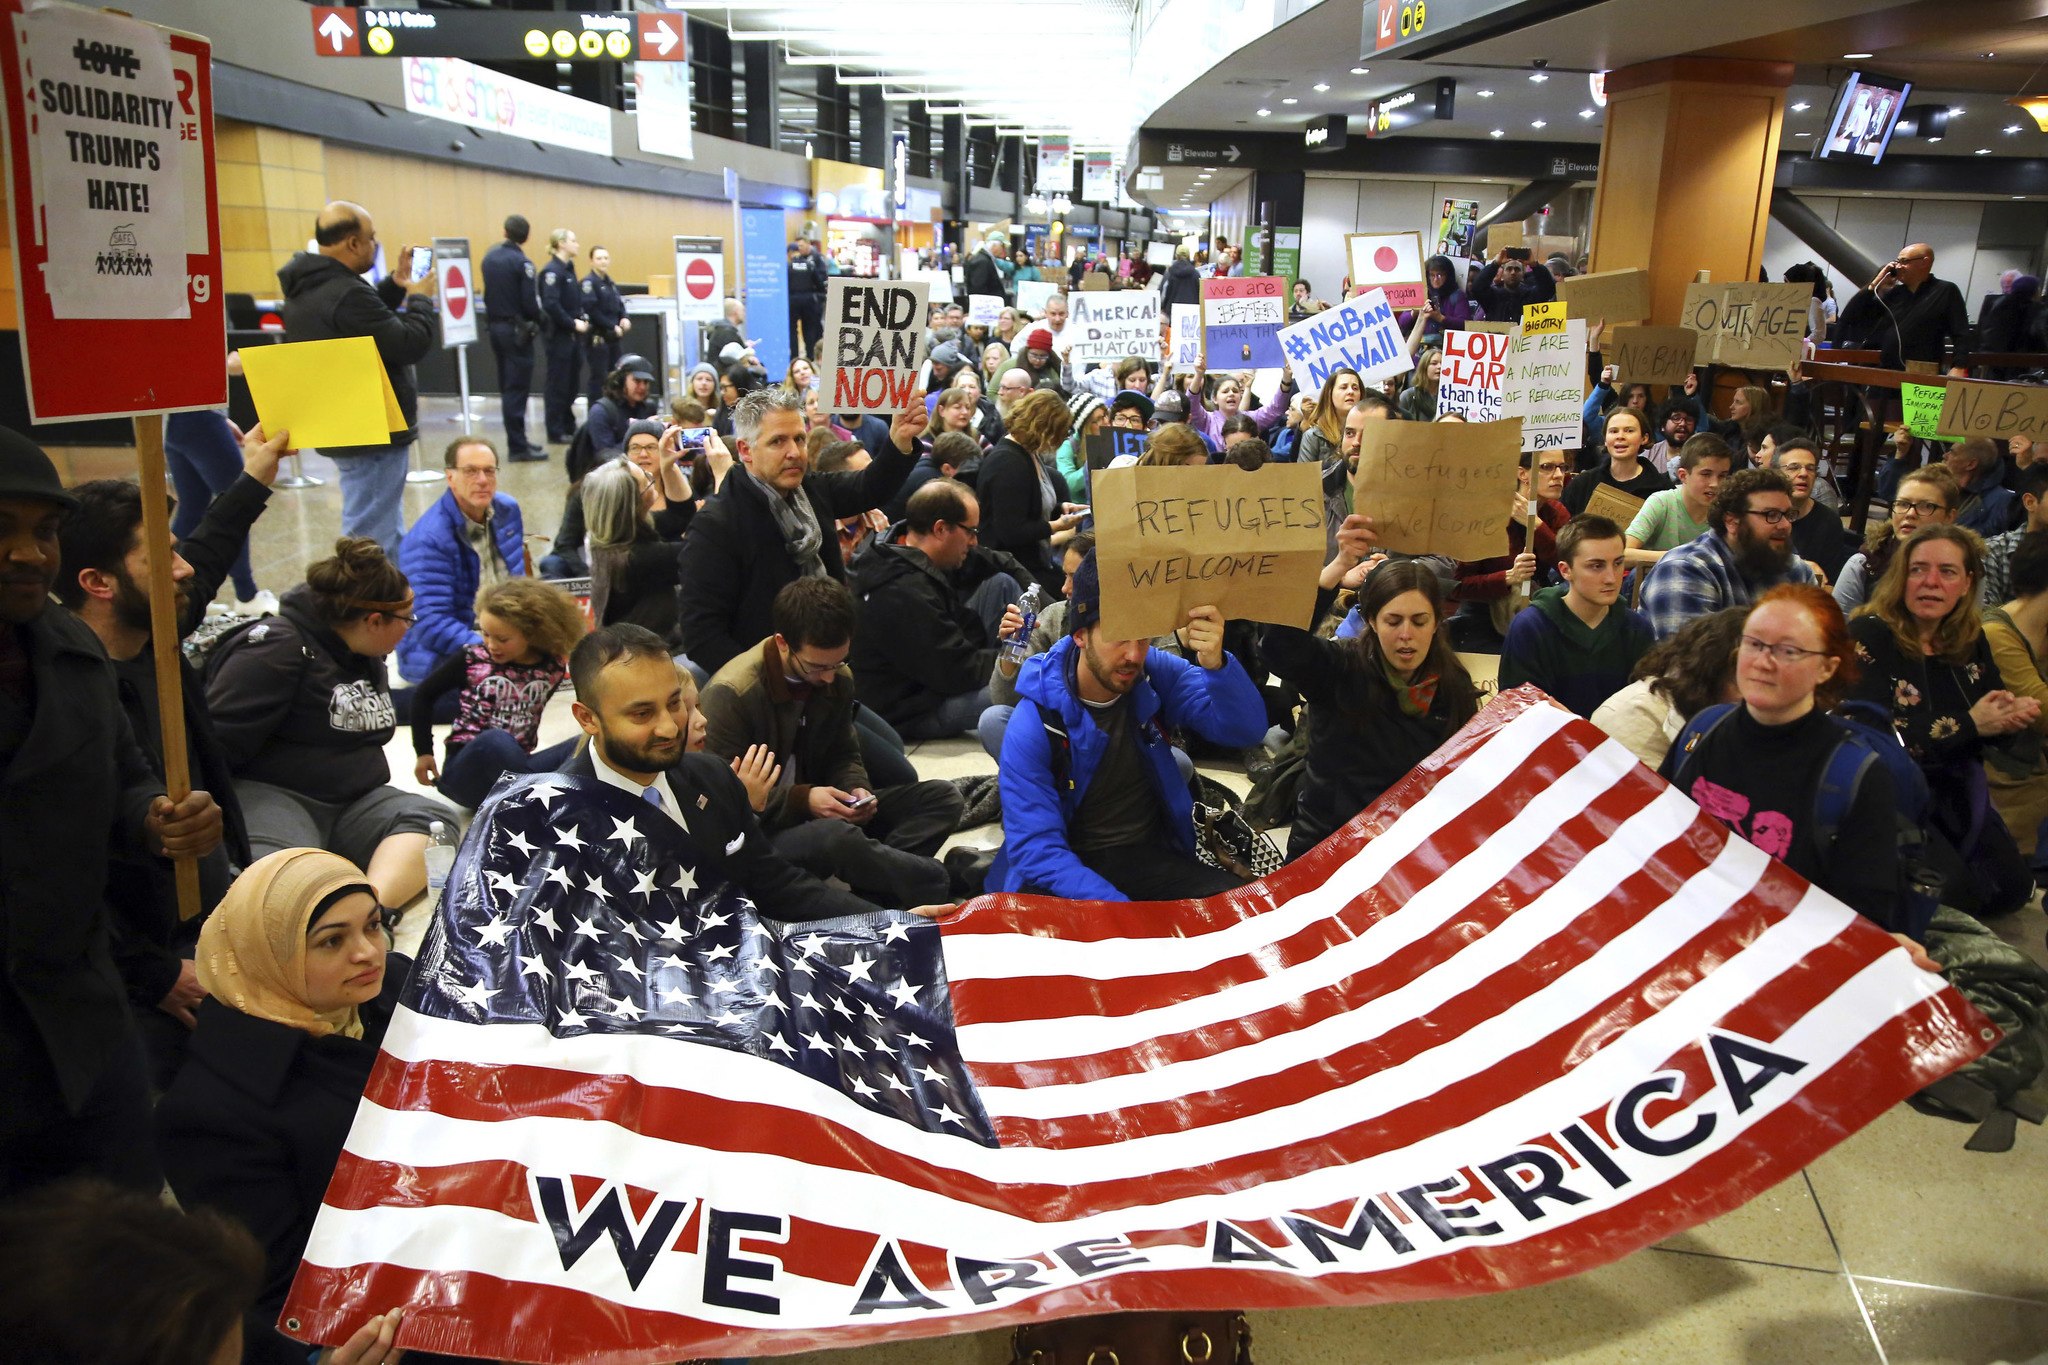 Demonstrators sit down in the concourse and hold a sign that reads “We are America” as more than 1,000 people gather at Seattle-Tacoma International Airport on Saturday to protest President Donald Trump’s order that restricts immigration to the U.S. (Genna Martin/seattlepi.com via AP)